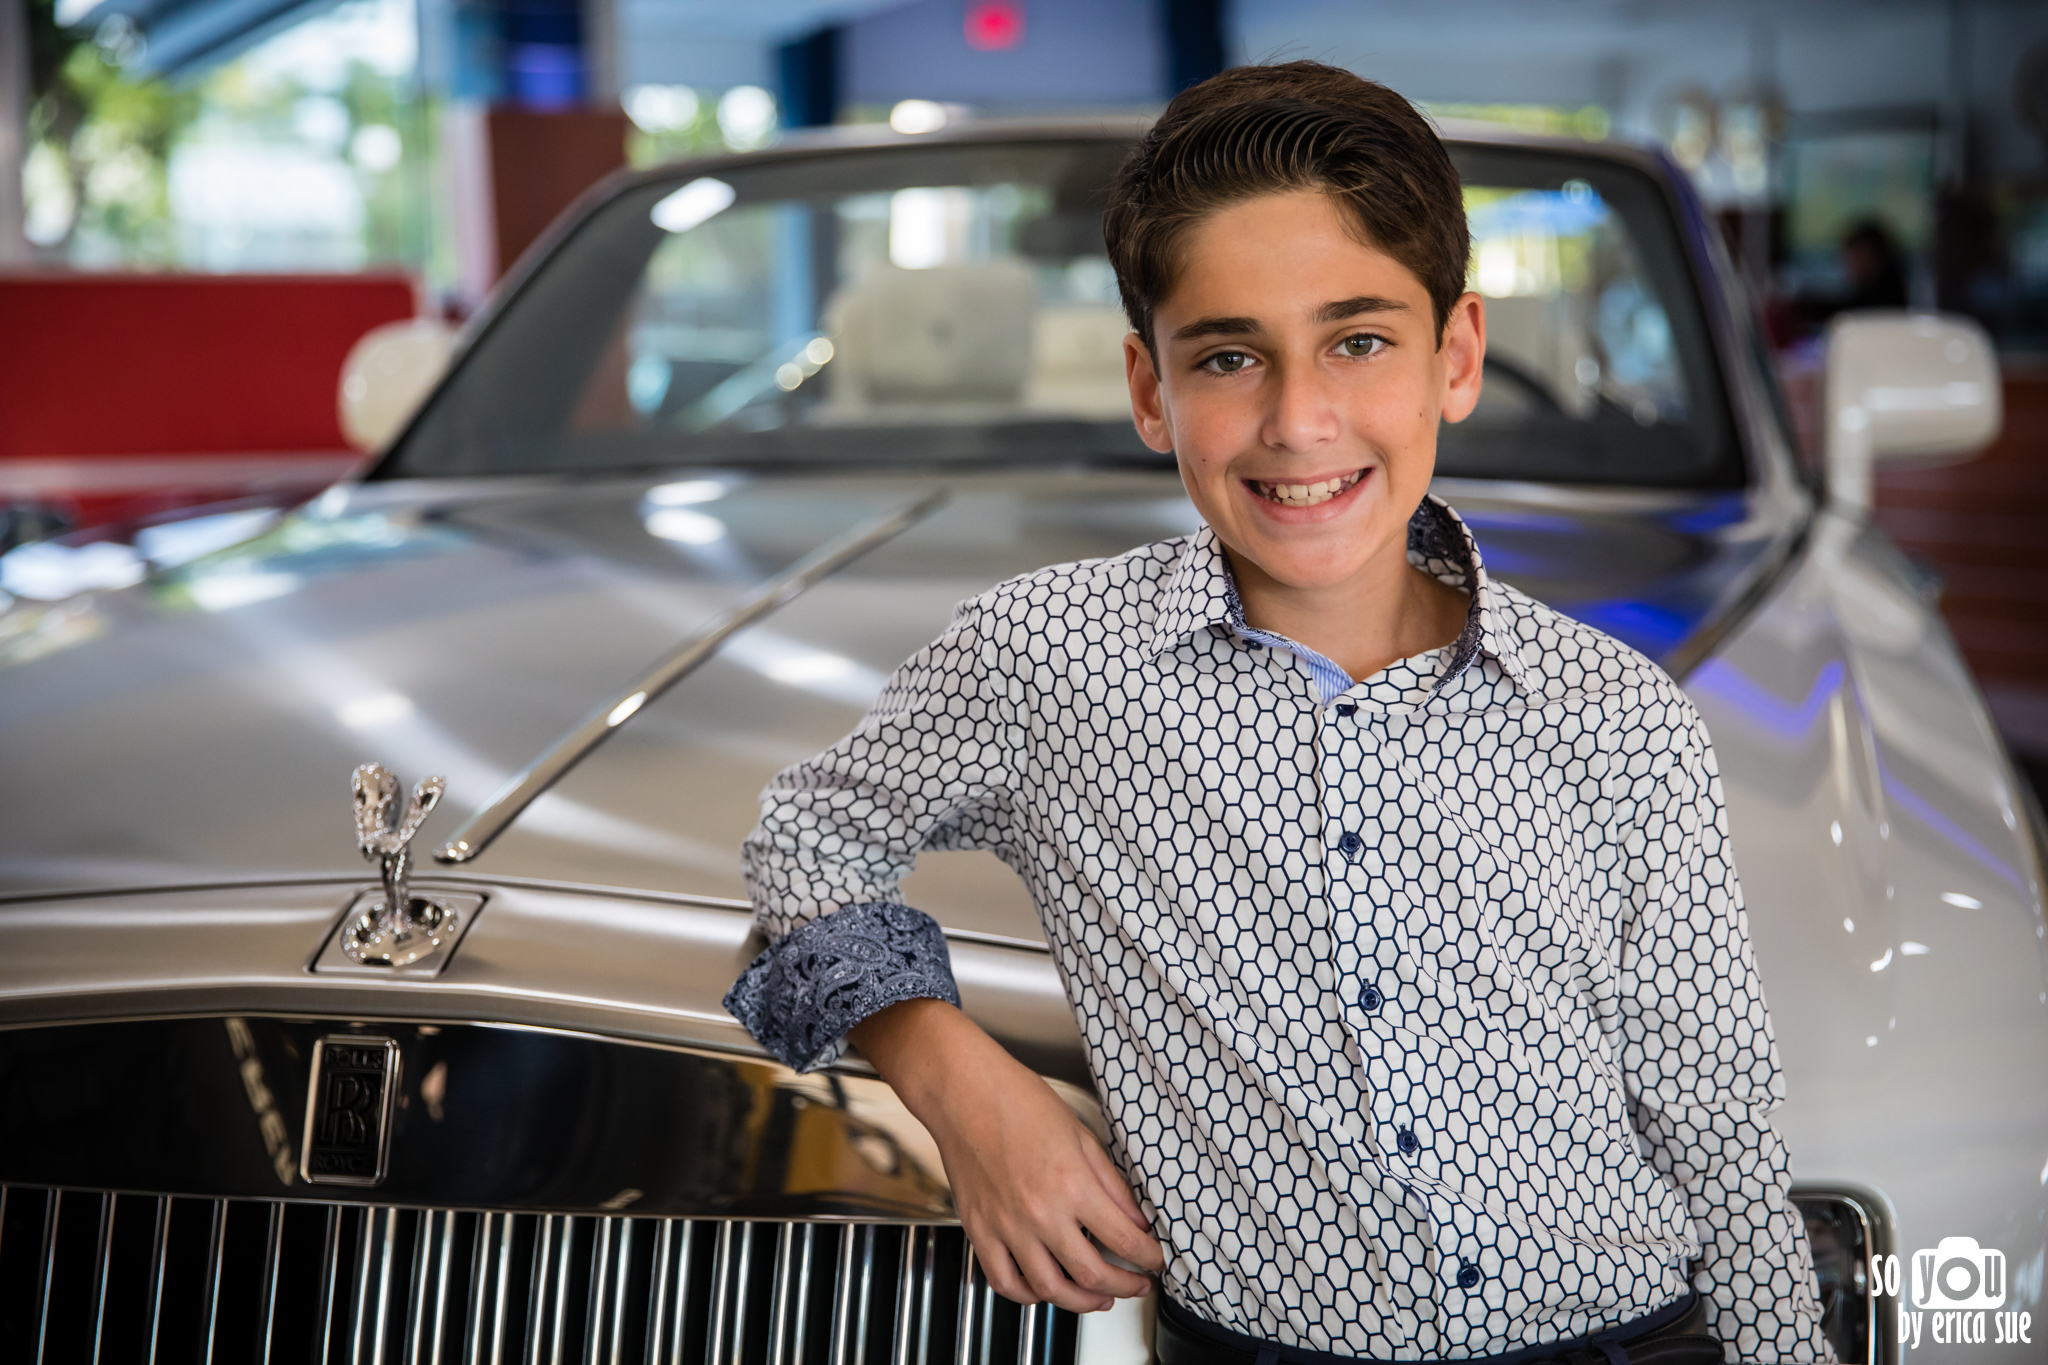 so-you-by-erica-sue-mitzvah-photographer-collection-luxury-car-ft-lauderdale-5065.jpg